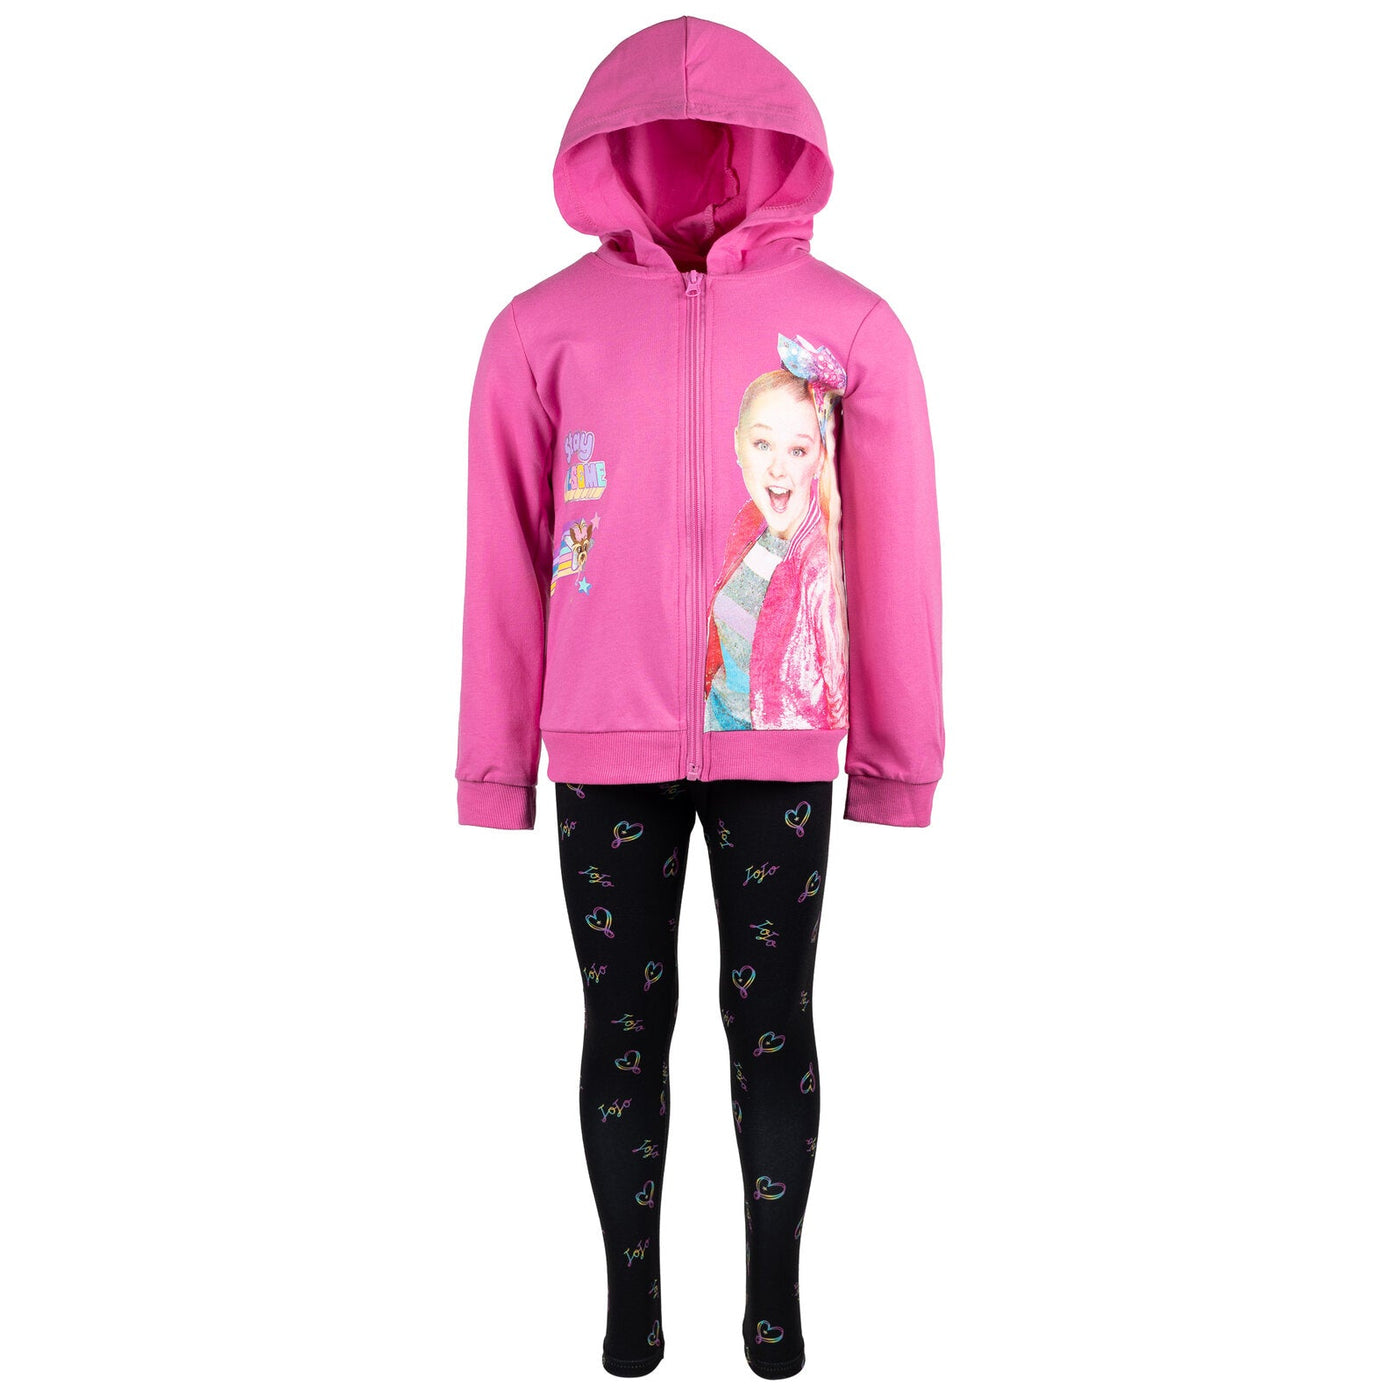 JoJo Siwa Zip Up French Terry Hoodie T-Shirt and Leggings 3 Piece Outfit Set - imagikids